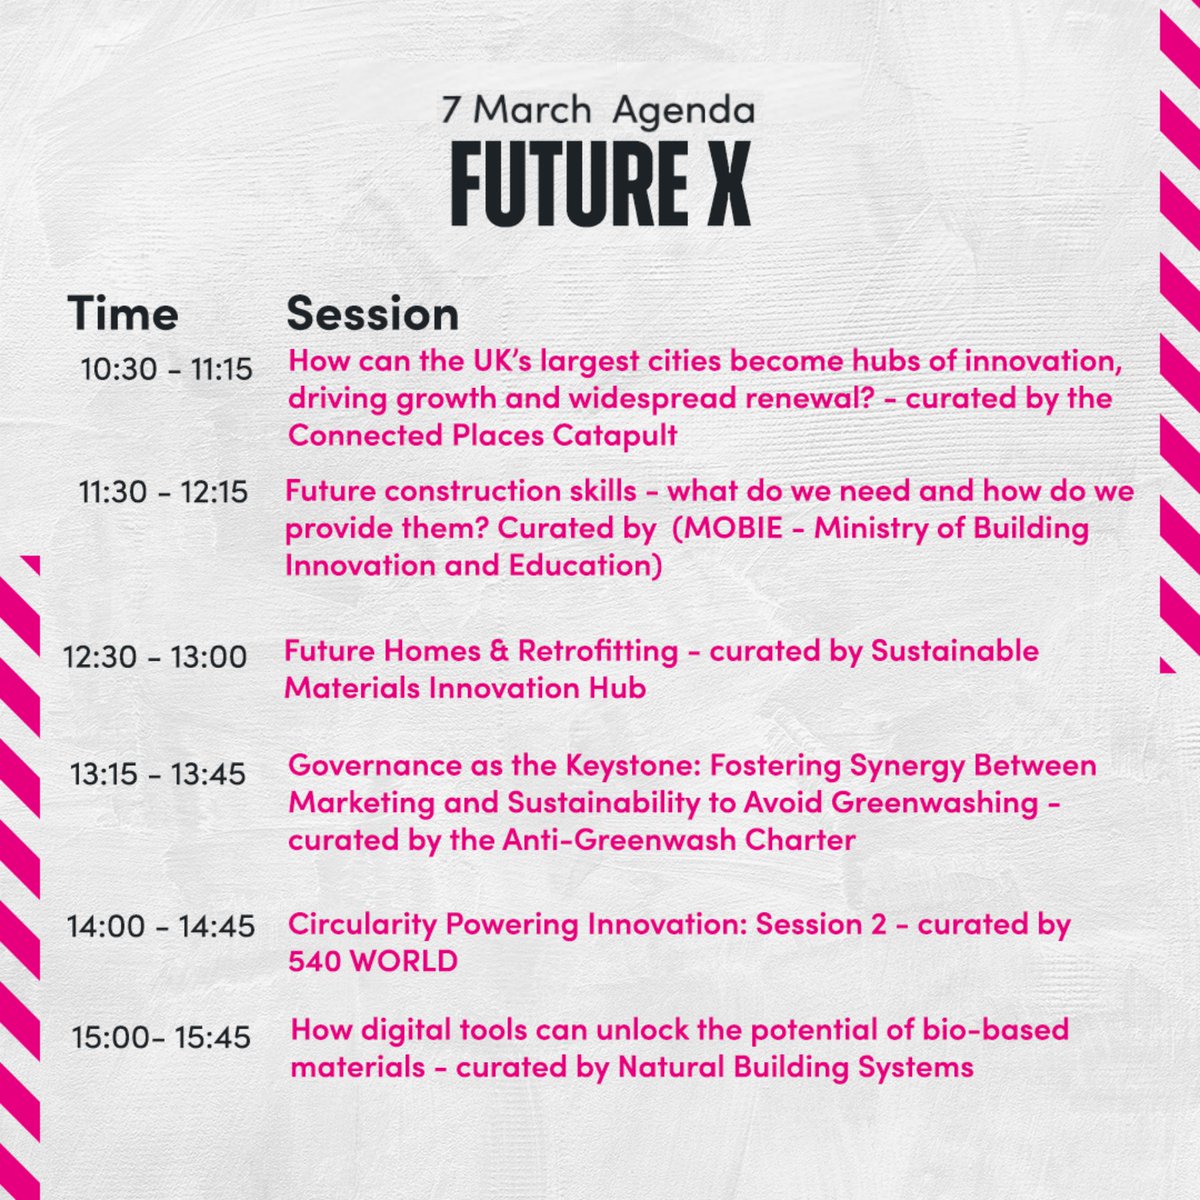 ⚡ Explore today's lineup at the FutureX Stage at Futurebuild 2024! With insightful sessions, there's something for everyone. Reserve your spot now and be part of the conversation! bit.ly/3TjkOEy #futurebuild2024